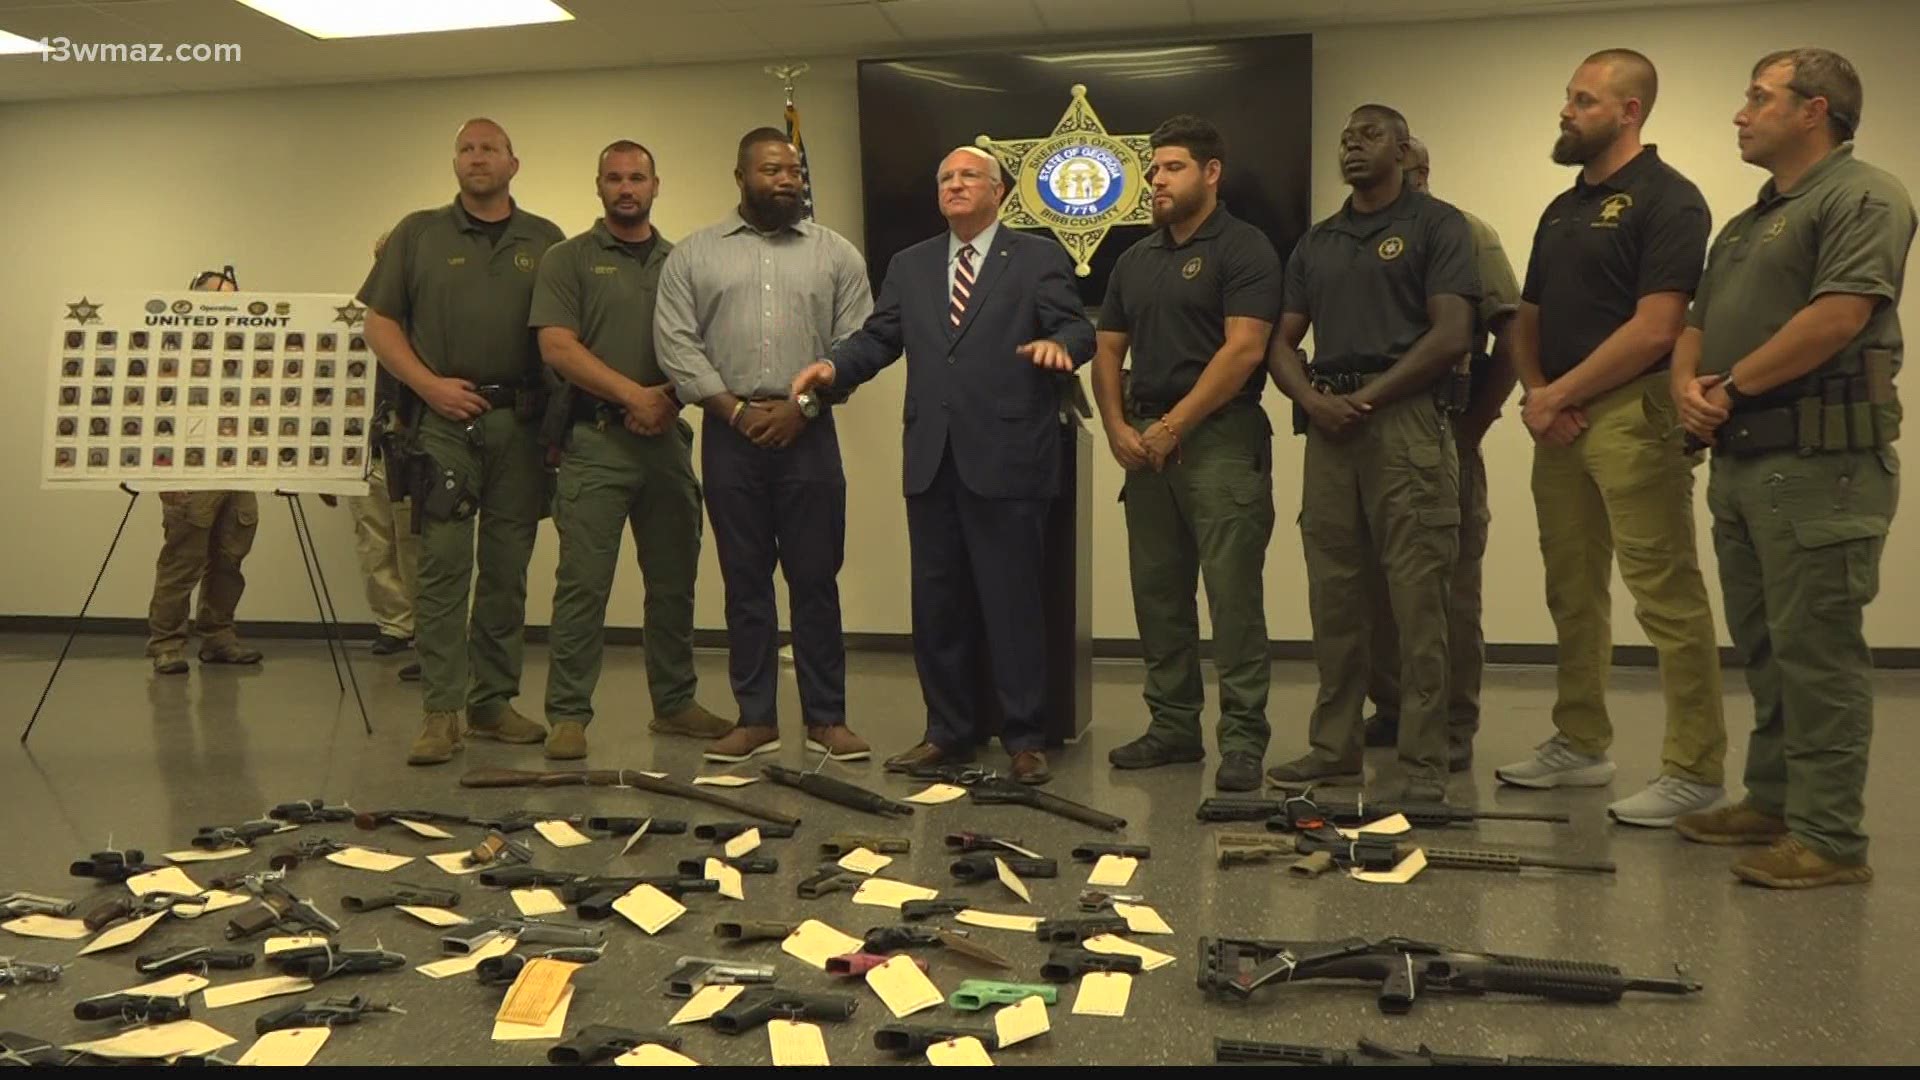 More than 50 people were arrested and dozens of guns were recovered in a 40-day operation.